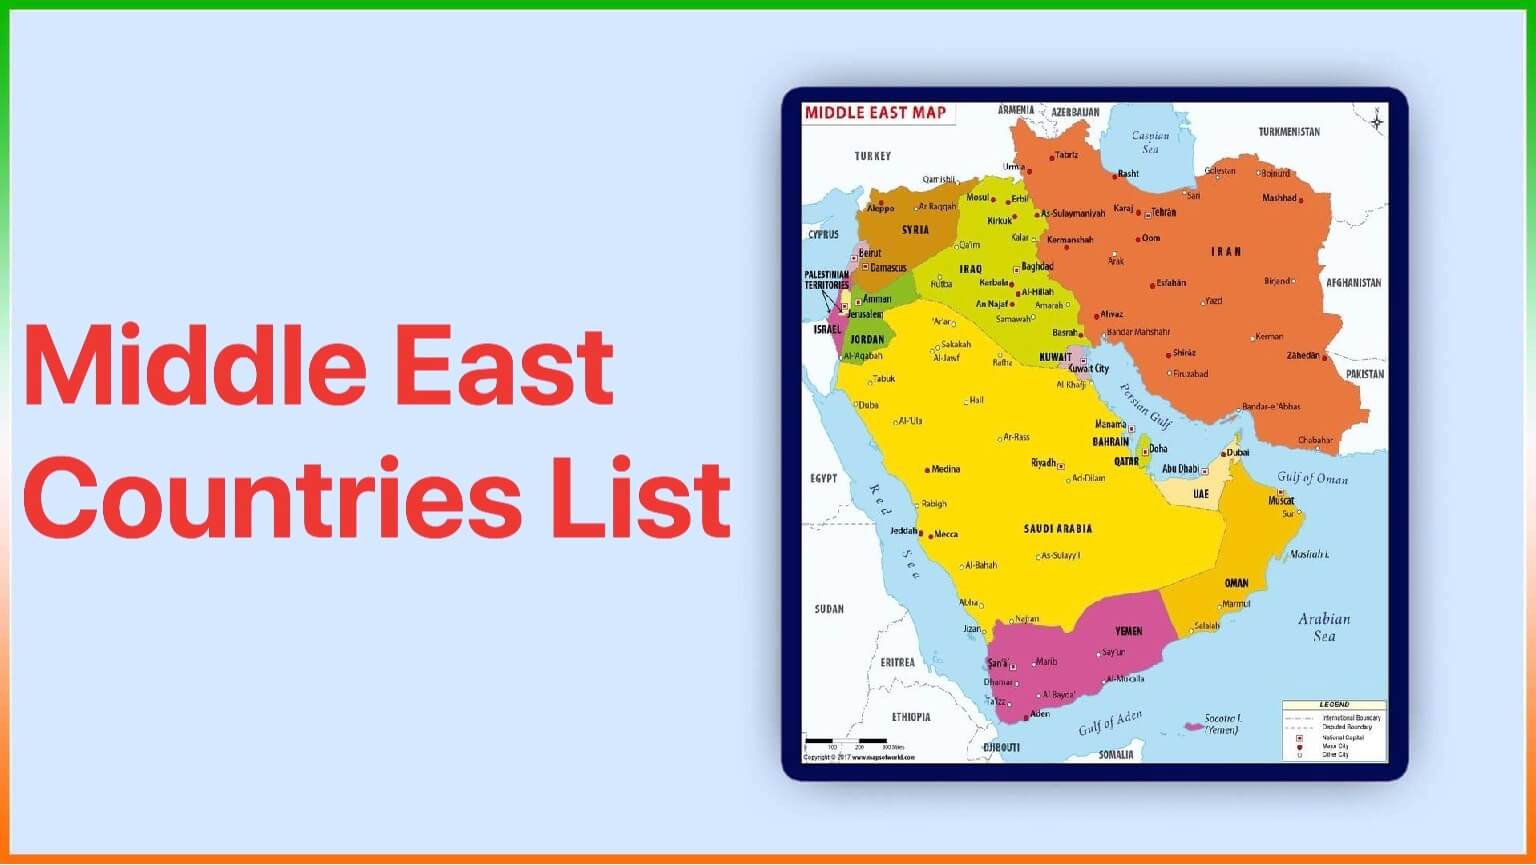 Middle East Countries List